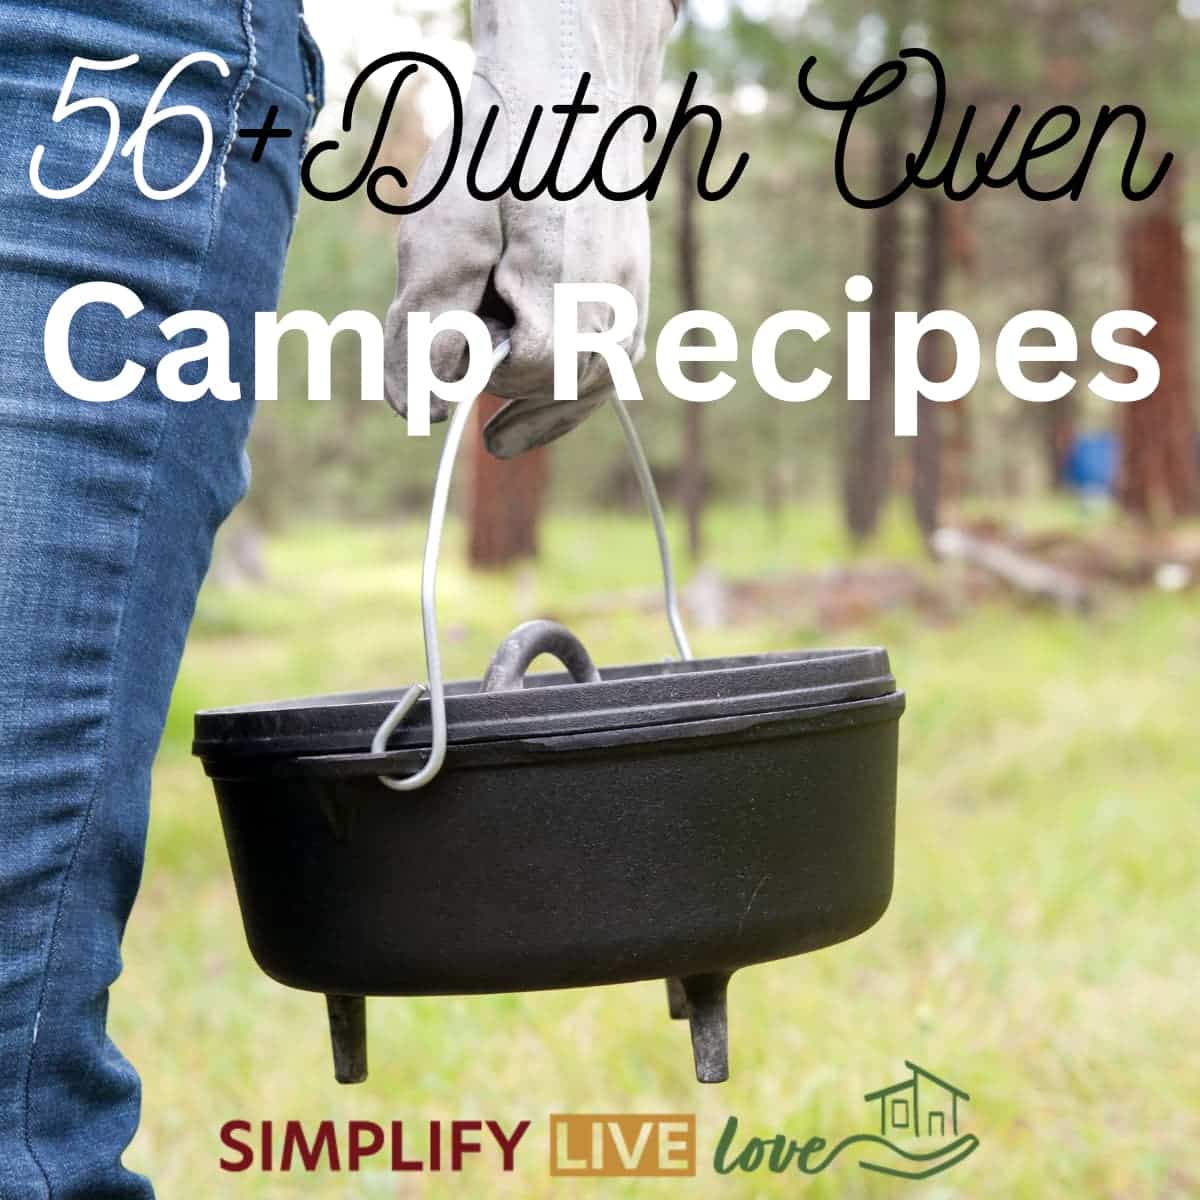 https://simplifylivelove.com/wp-content/uploads/2021/07/Delicious-Dutch-Oven-Camping-Recipes-Your-Family-Will-Love-FB-by-Honey-1200x1200-1.jpg